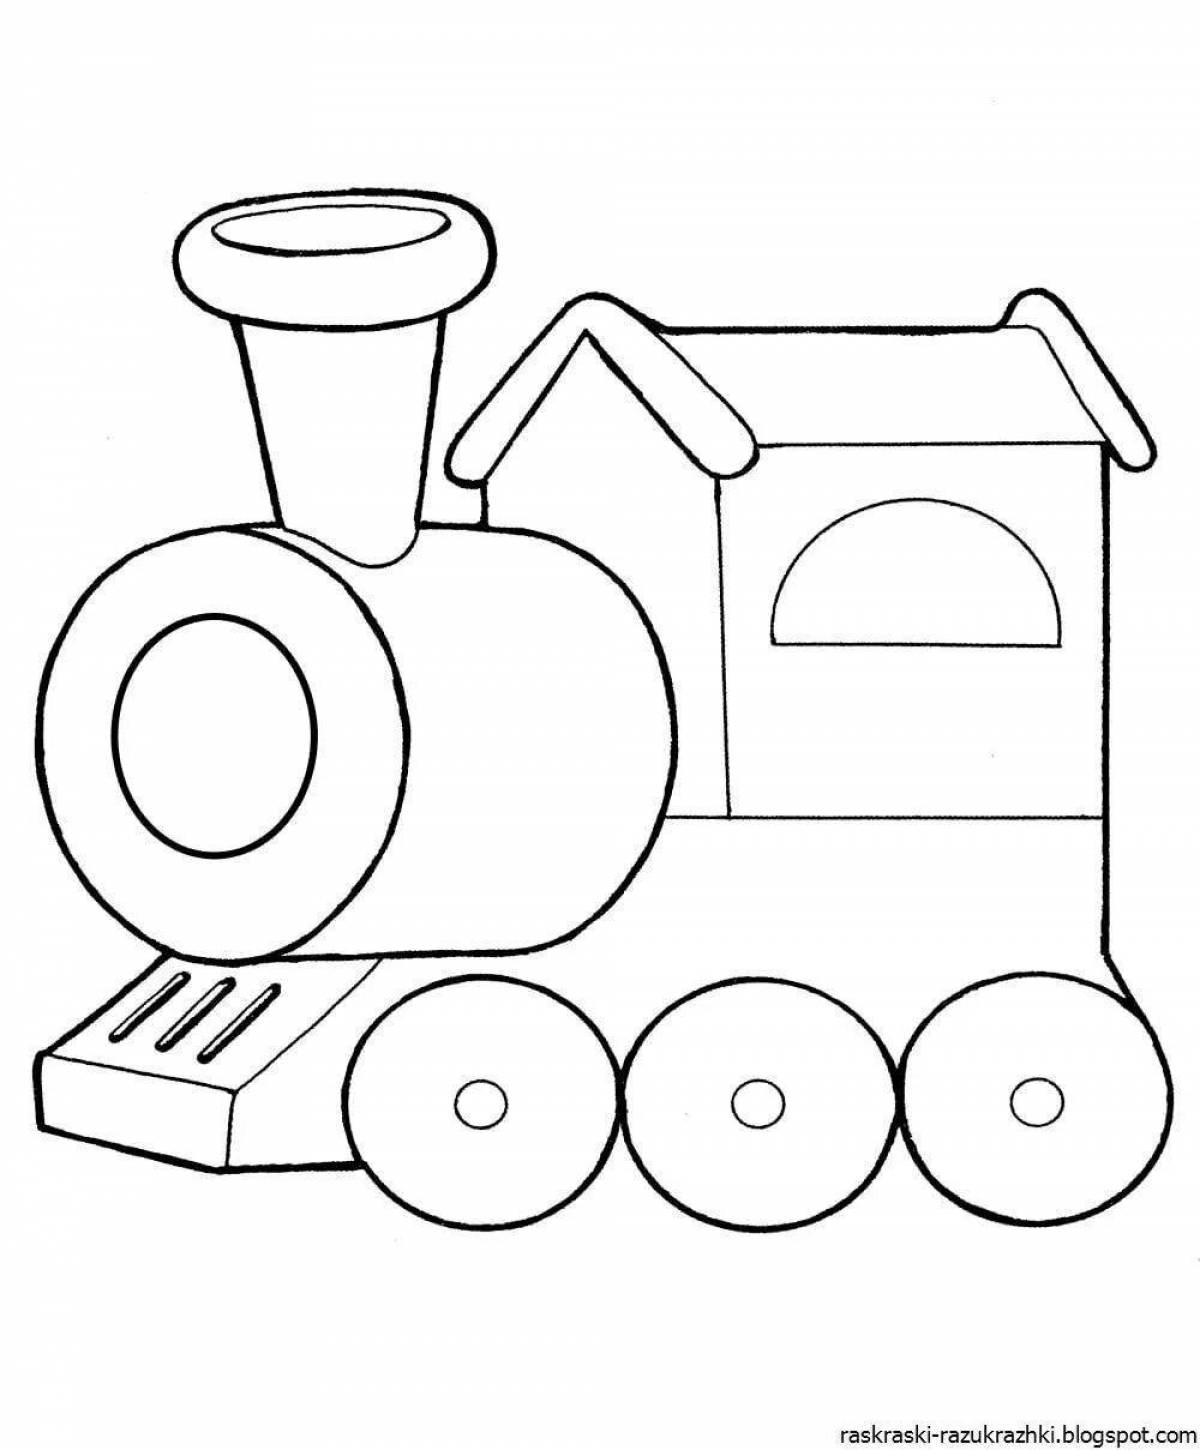 Fun coloring train for kids 2-3 years old